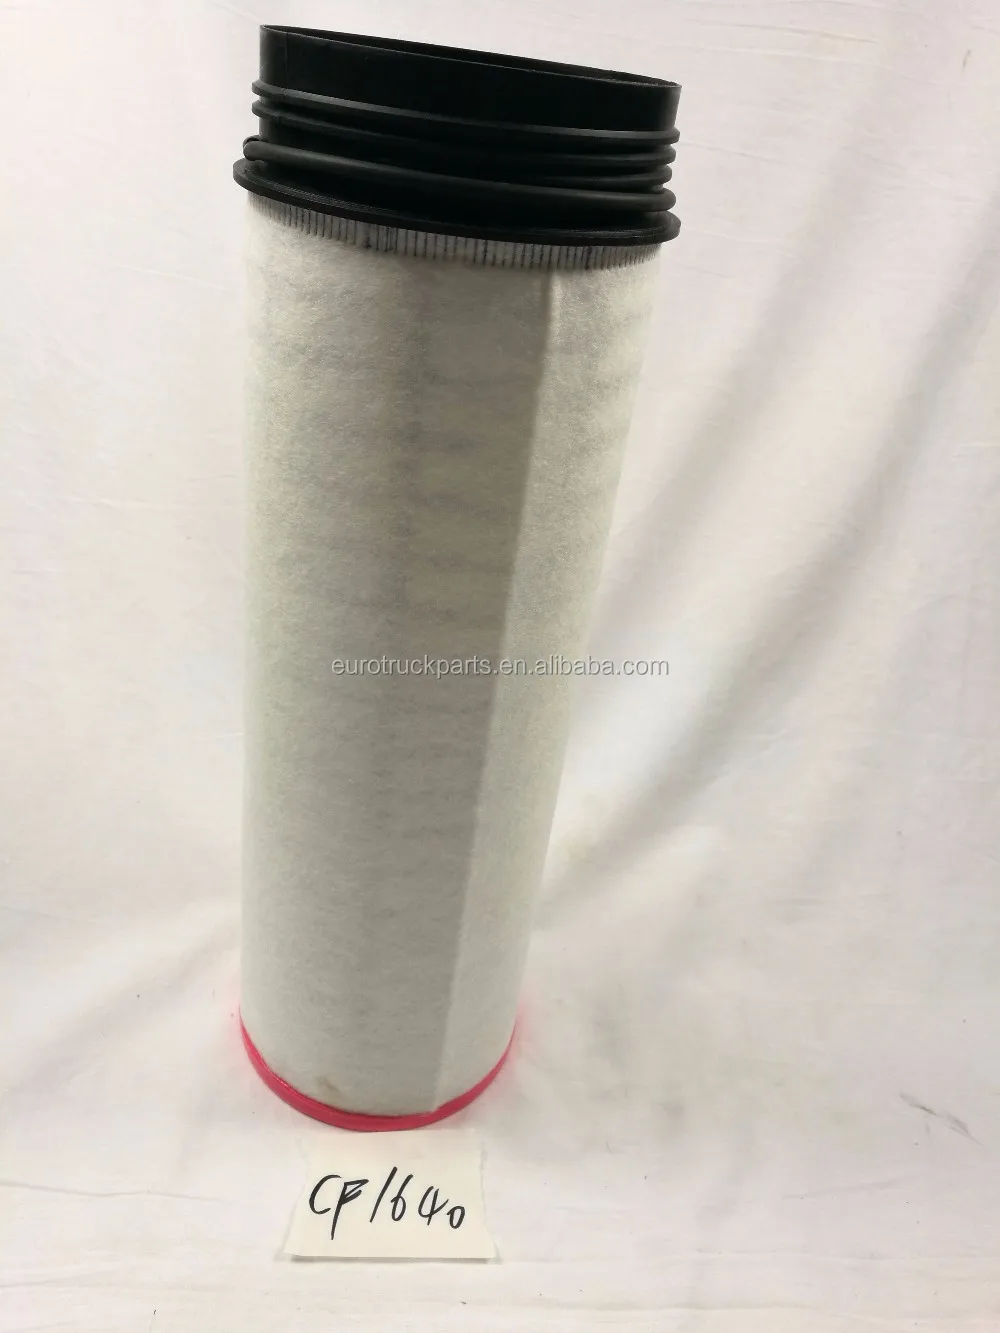 High quality air filter oem 81084050017 CF1640 for Man Tga heavy truck auto body parts (3).jpg